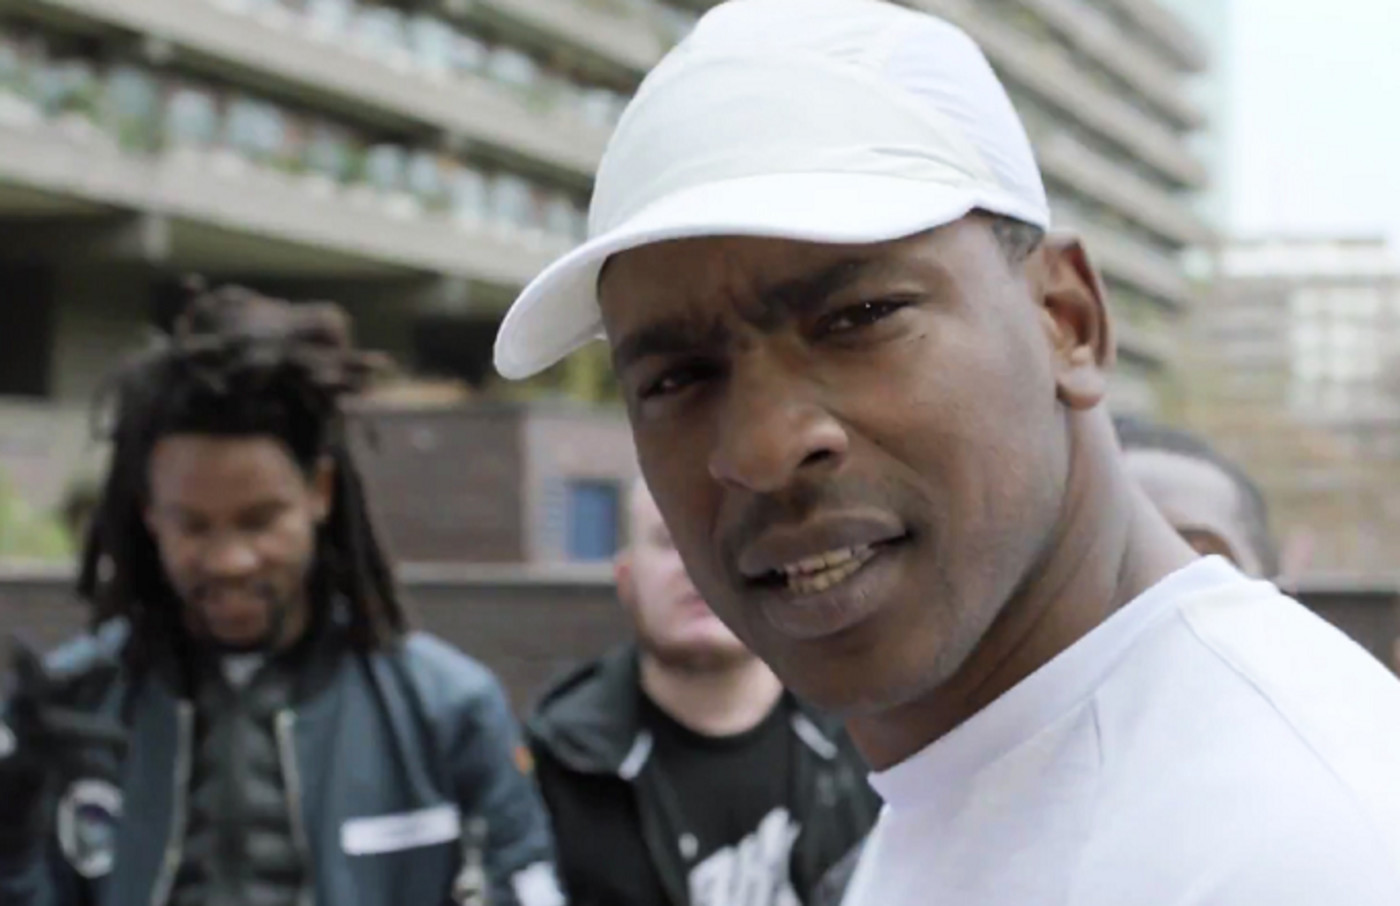 Skepta: “Somewhere In My Heart, I Feel Like I’m Way Past A Record Deal ...